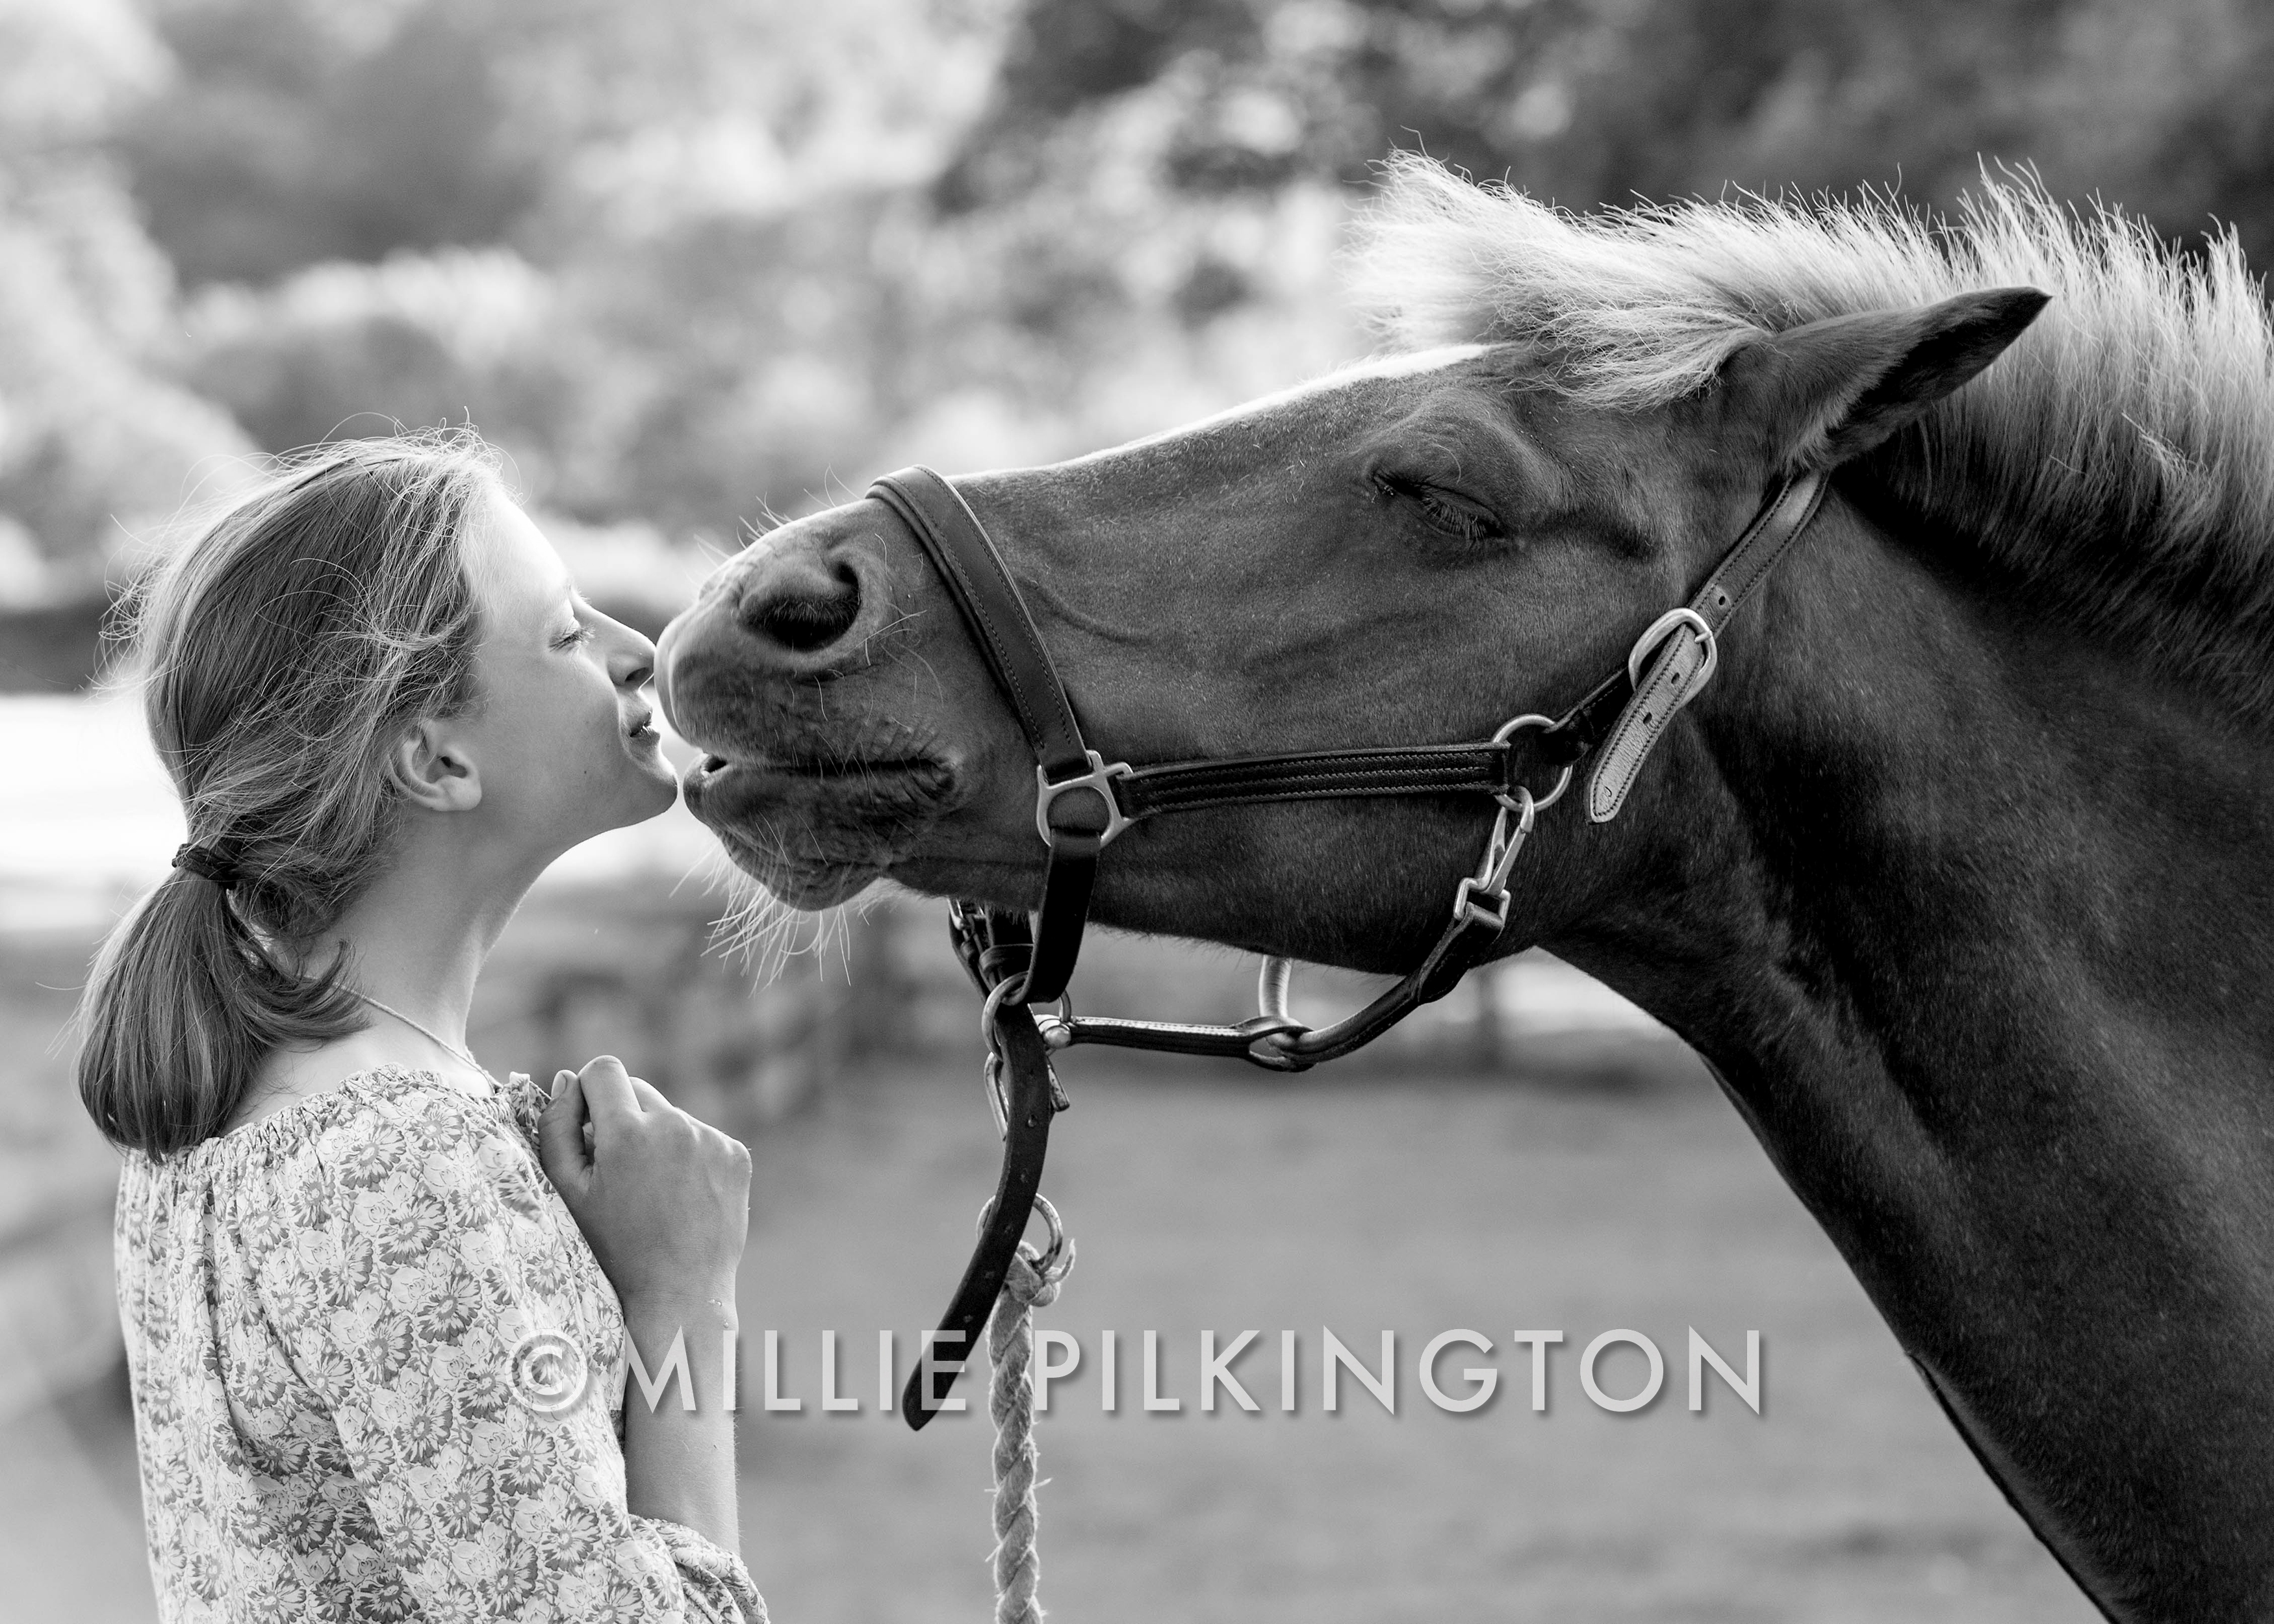 A portrait of a child's love for her horse